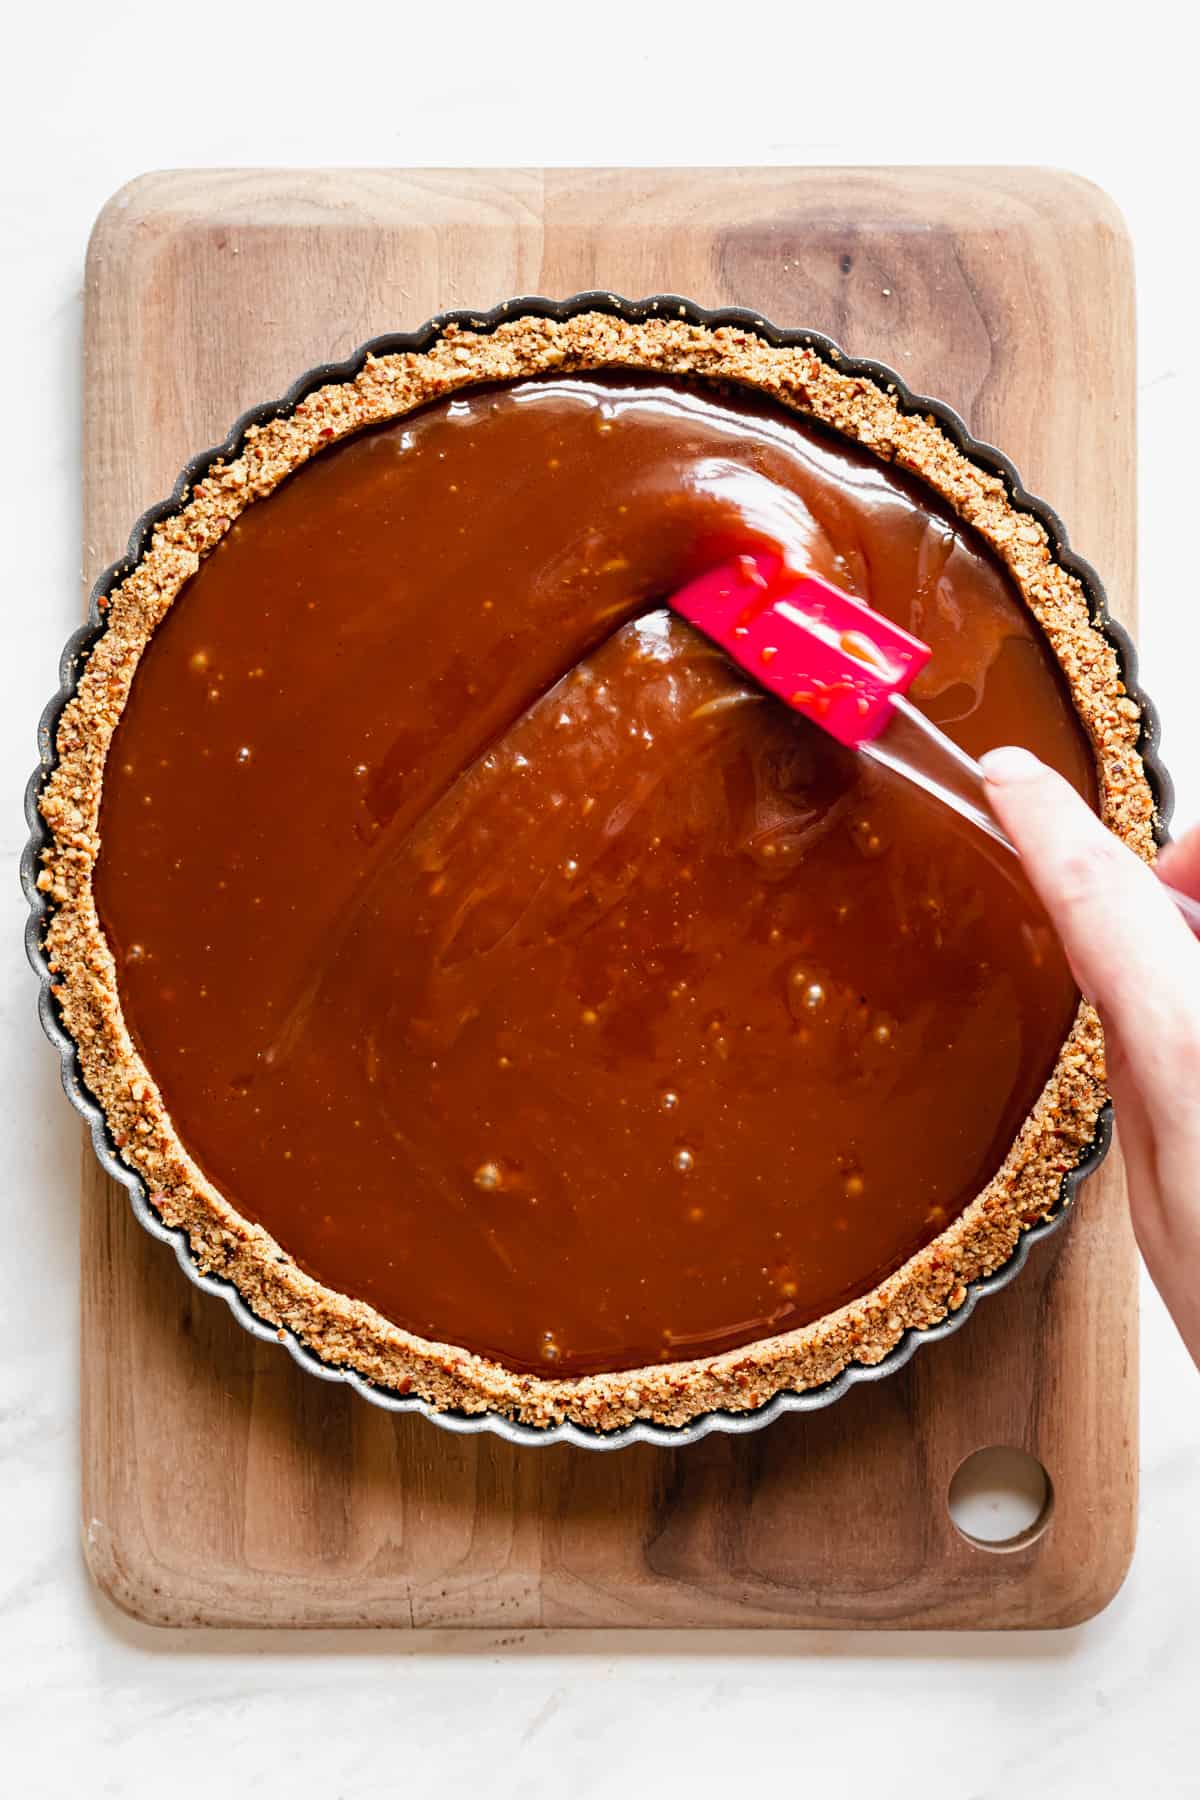 Caramel being spread to meet the edges of the pie